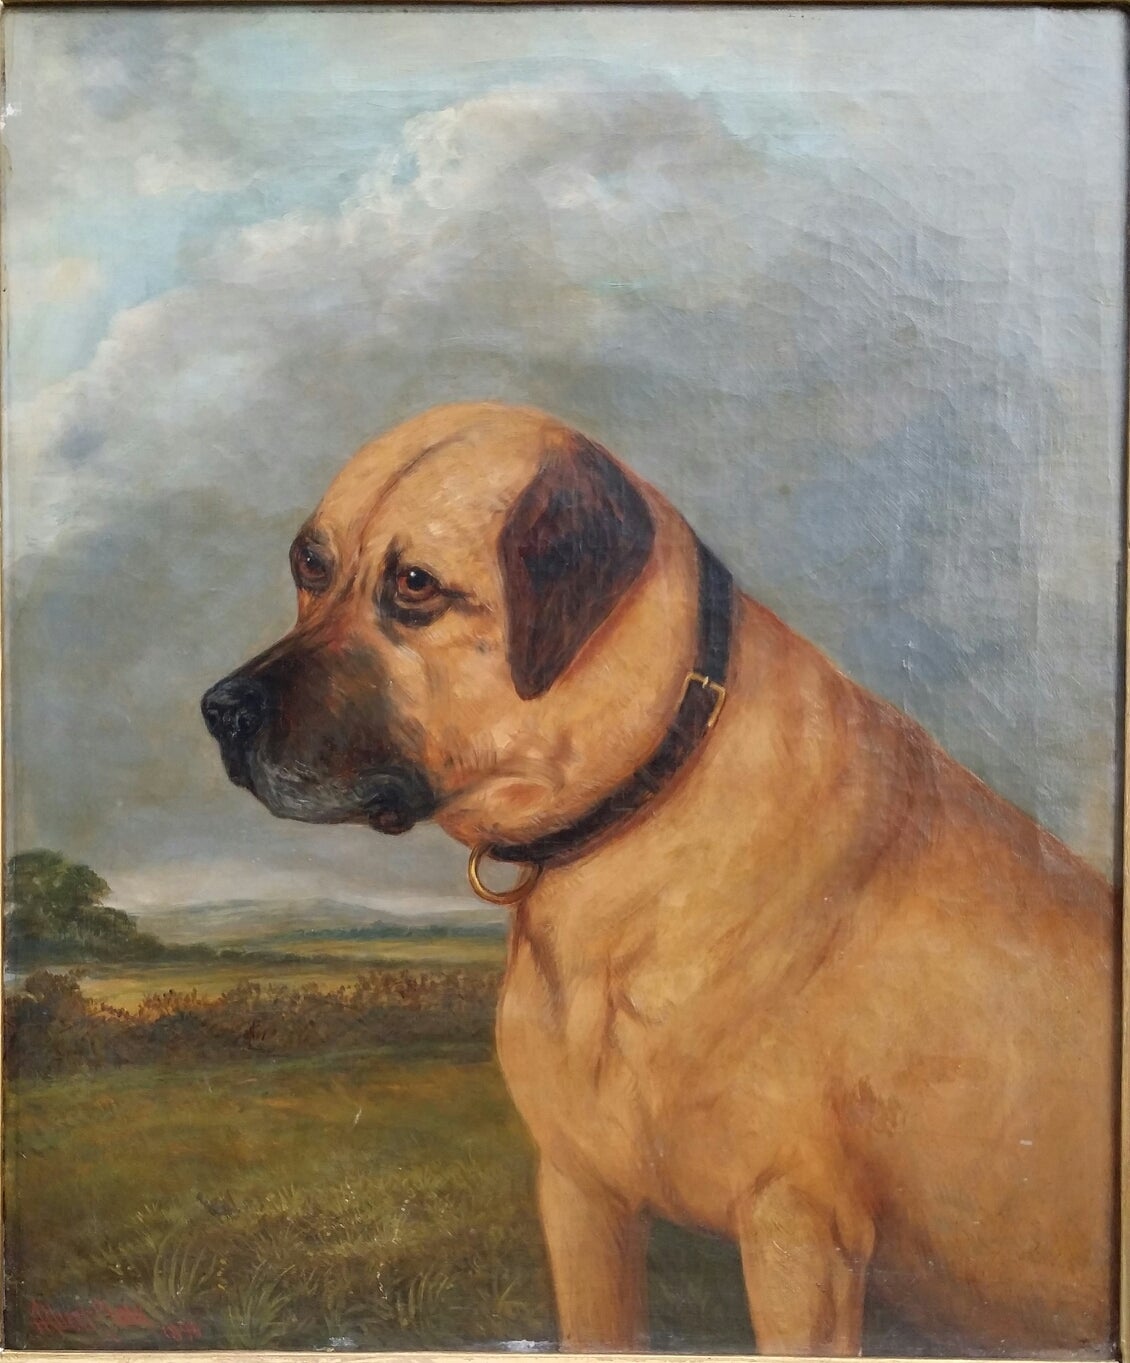 Mastiff- Oil on canvas. Signed : Albert Clark 1890. Albert Clark ,English artist 1821-1909. 90% of his painting's are of horses,the rest other animals. Small formats 50x60 or less. This painting is good condition.